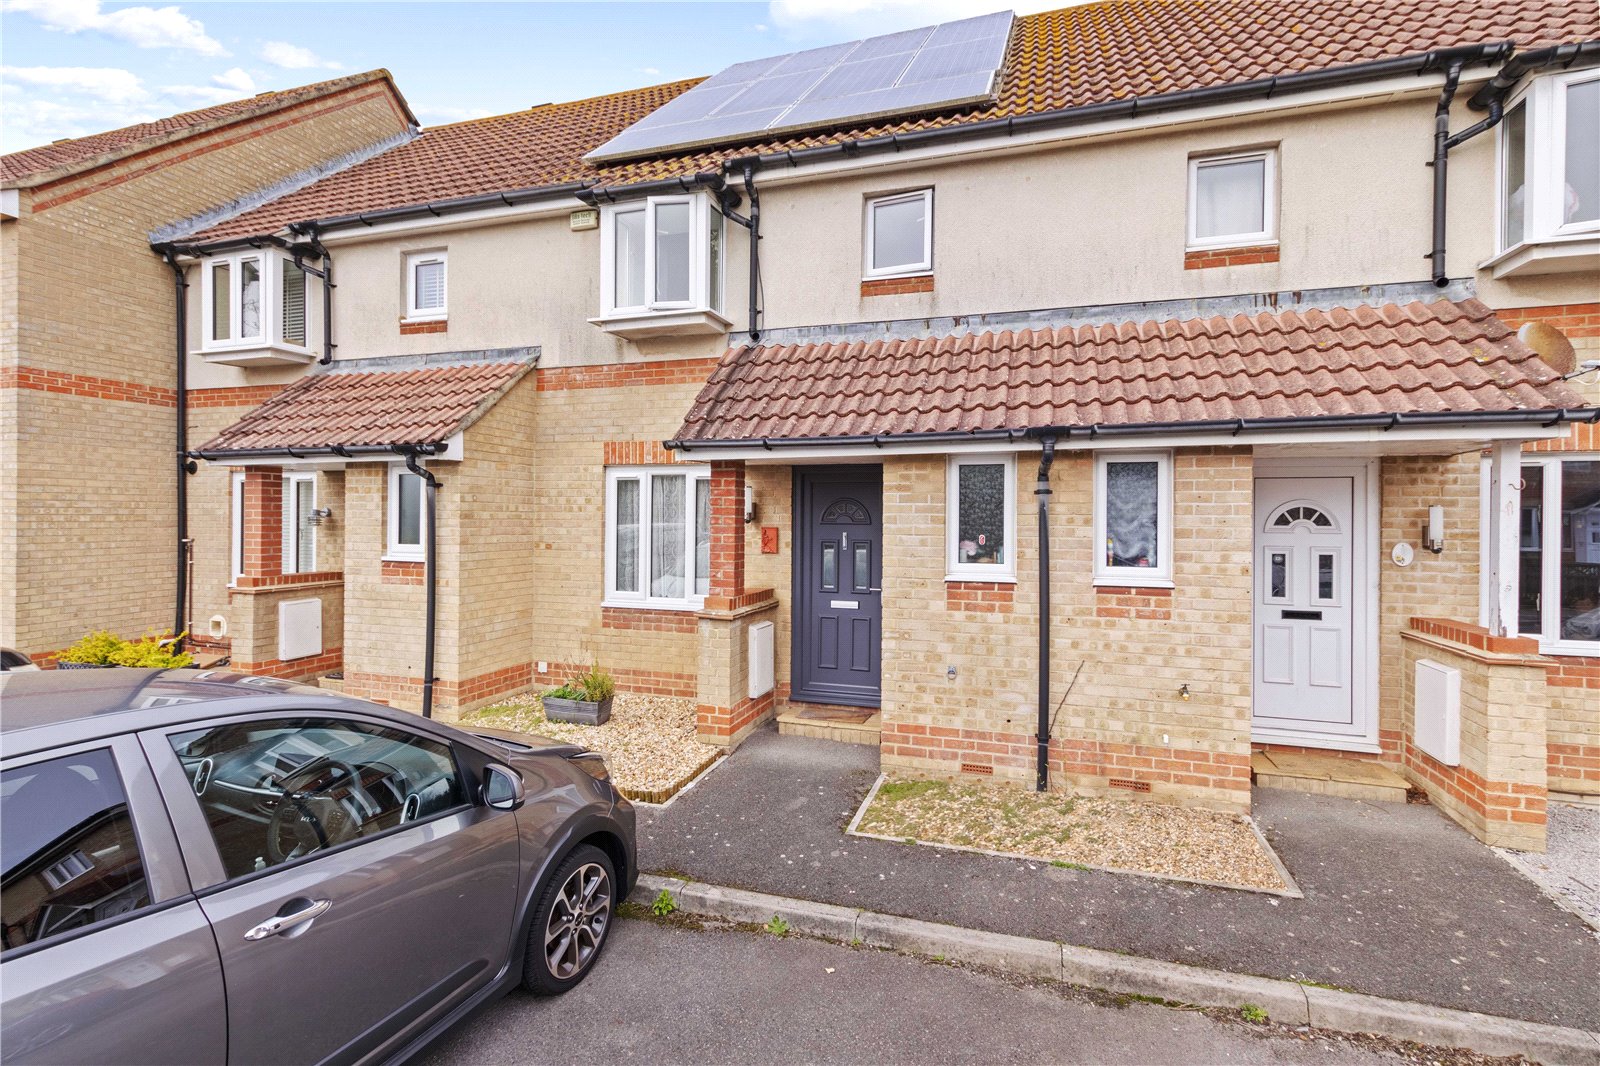 3 bed house for sale in Ensign Drive, Gosport - Property Image 1